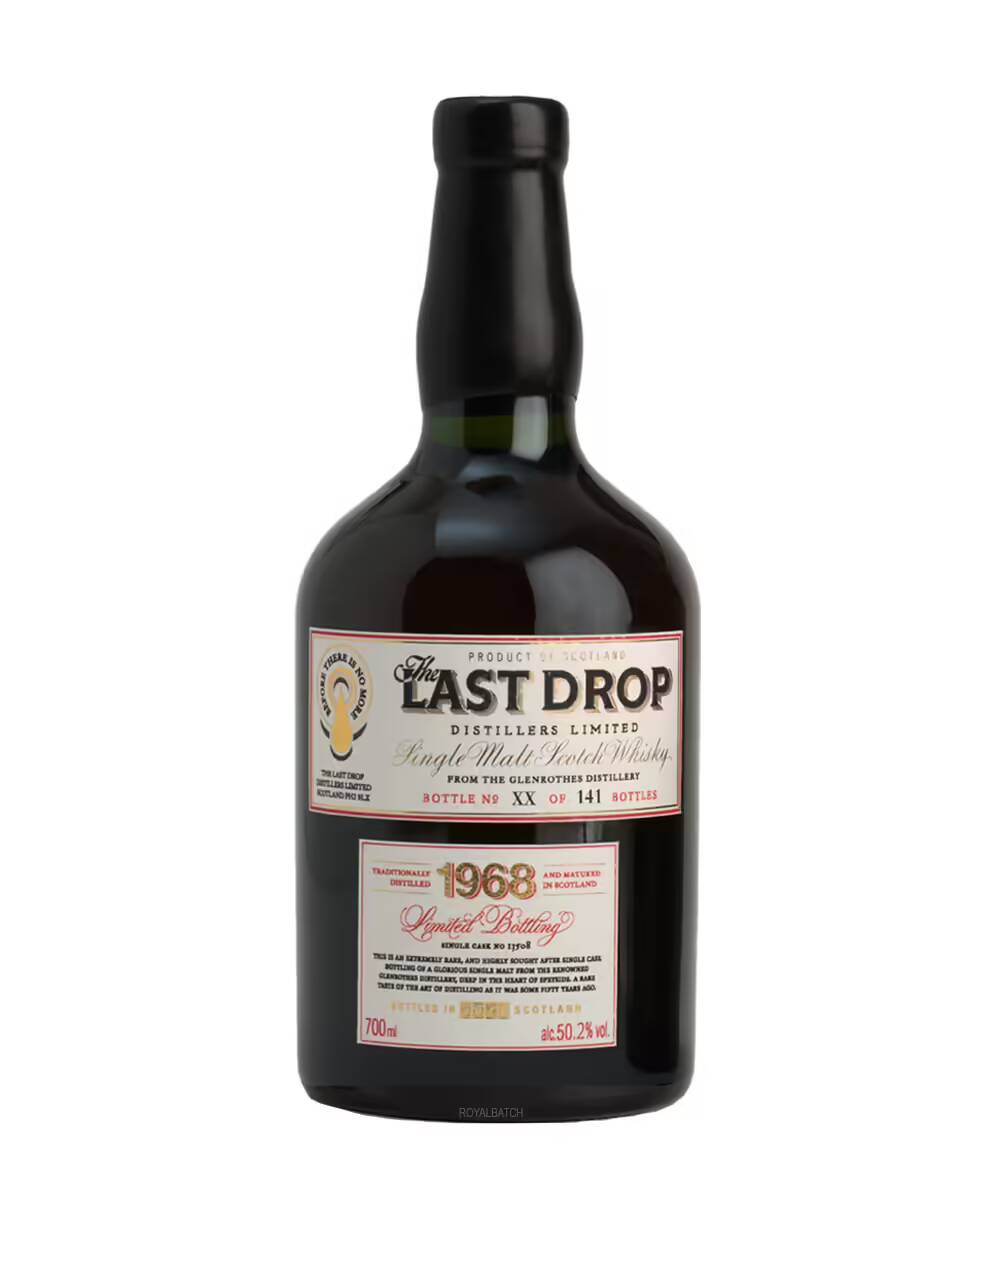 The Last Drop 1968 Year Old Cask 13504 Bottle No 159 Scotch Whisky